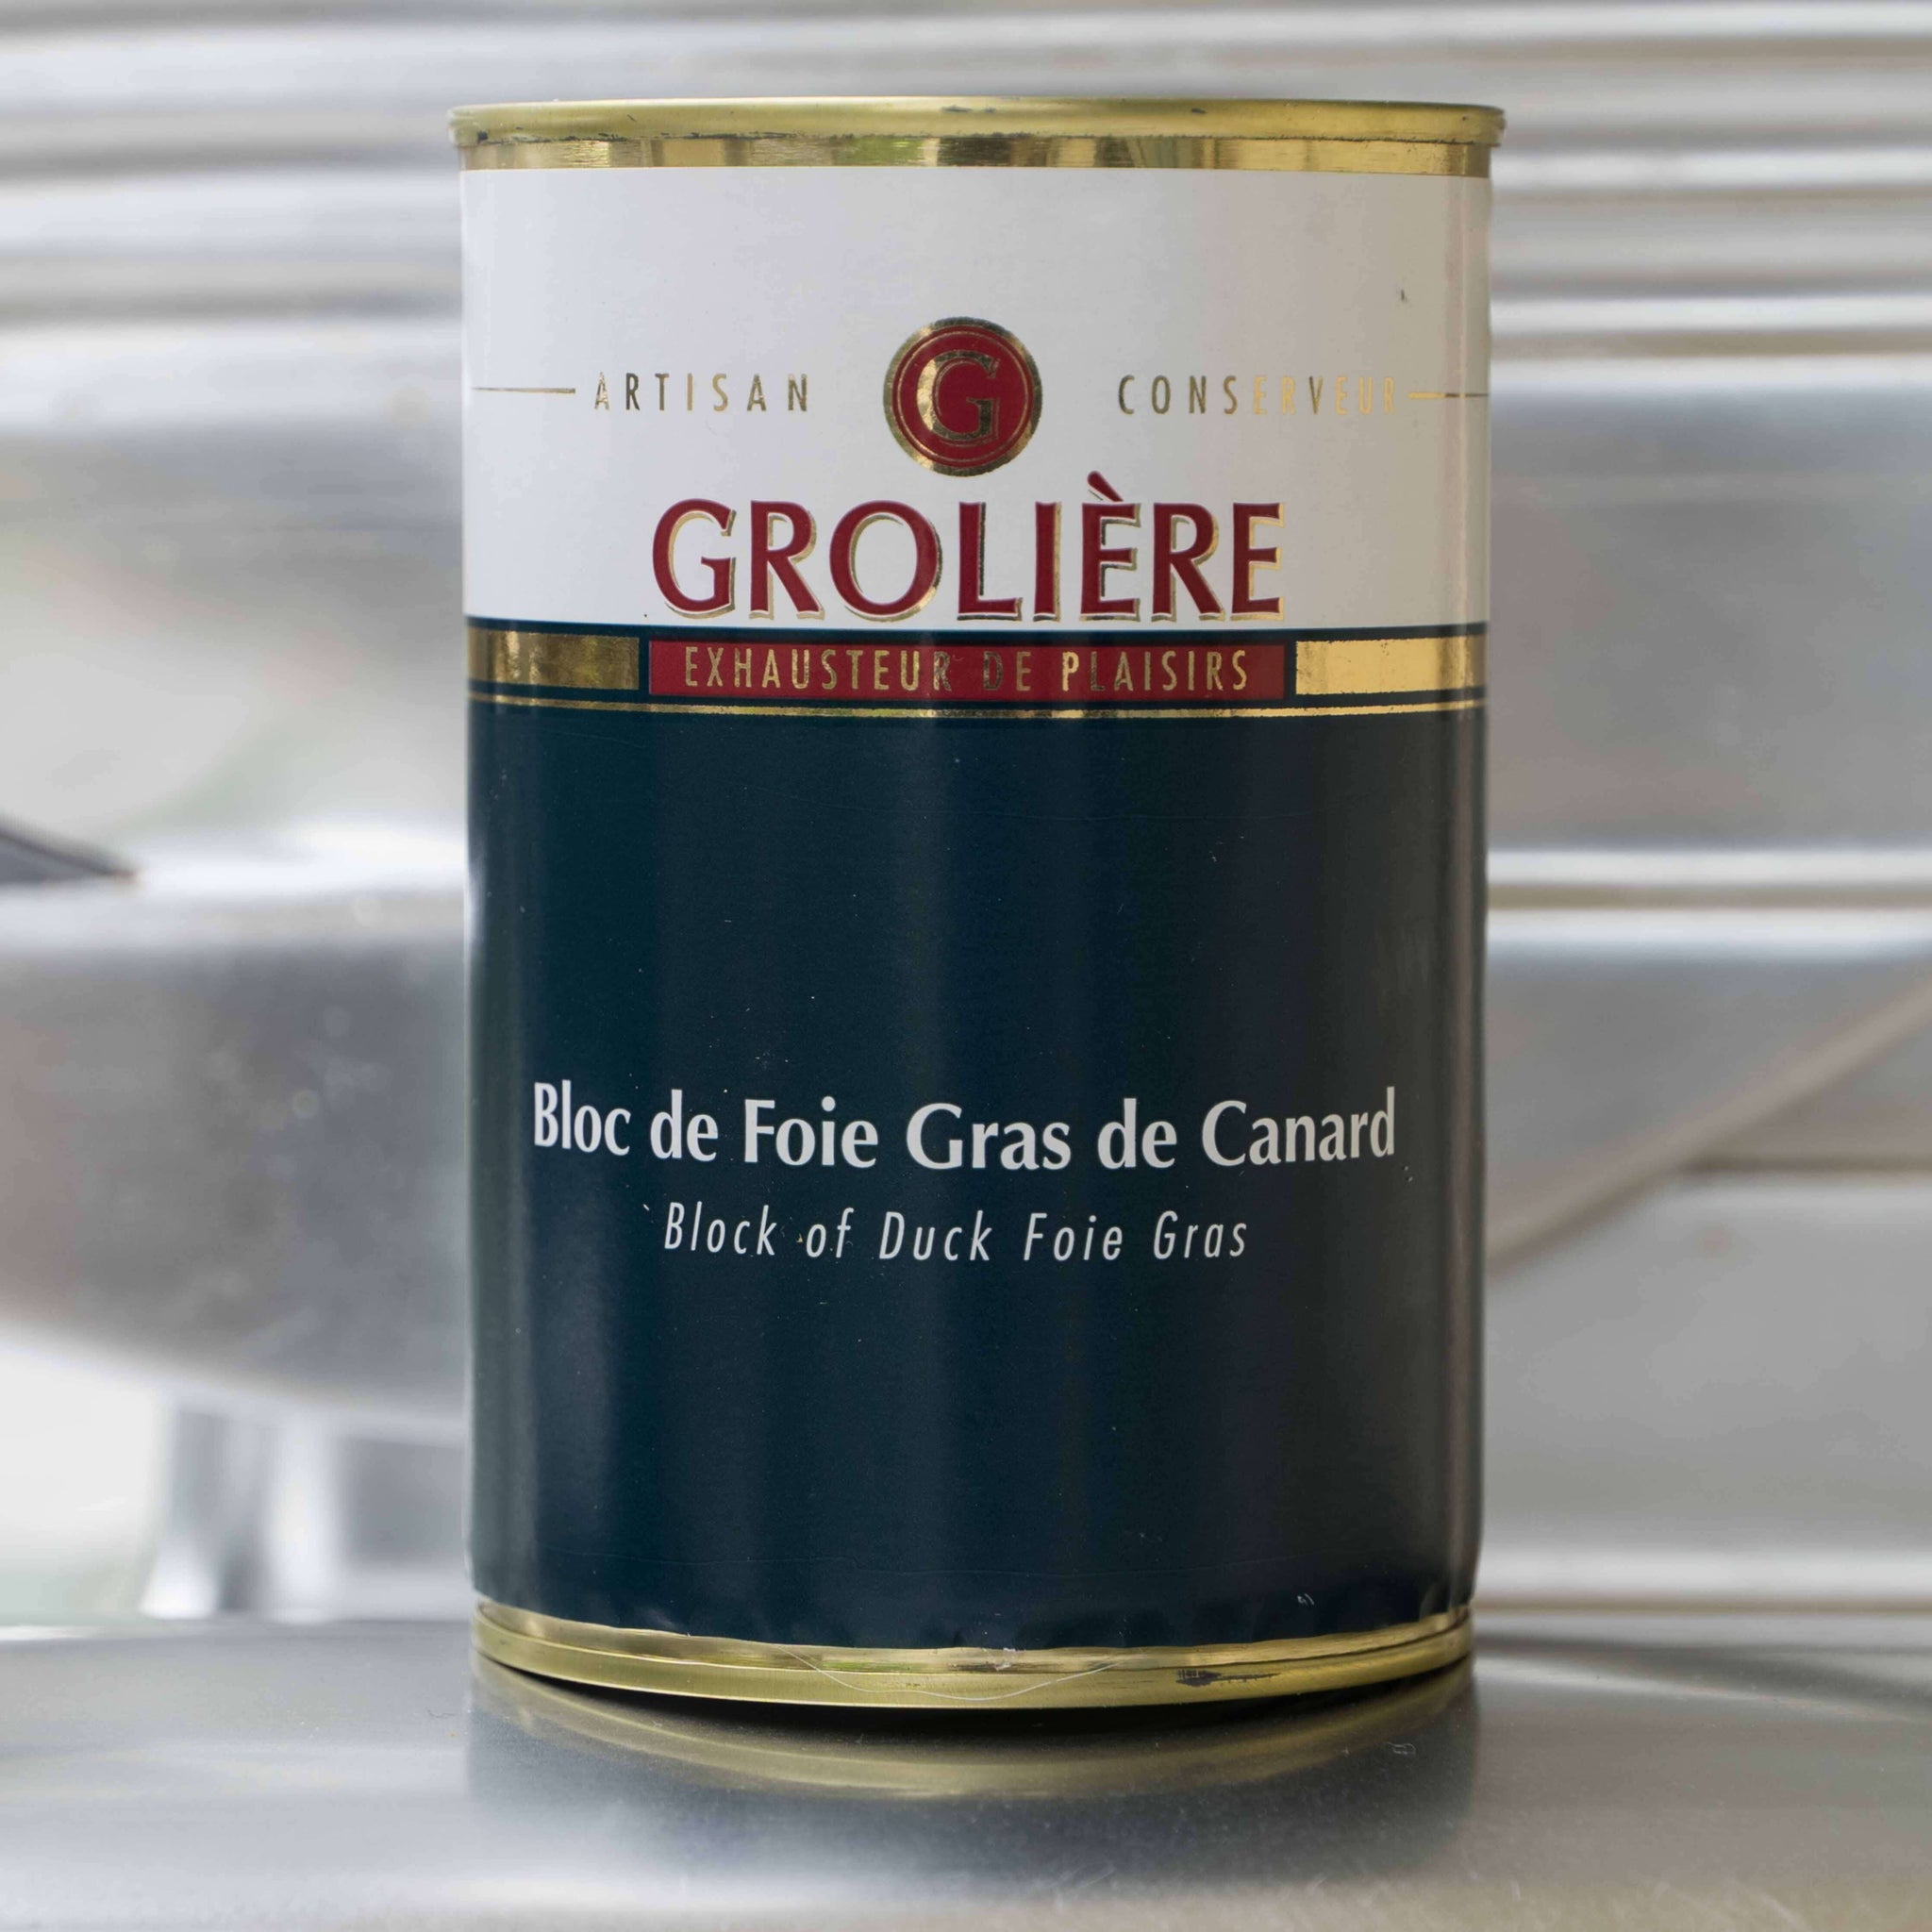 Canned meat LABEYRIE Terrine duck pate 20% foie gras, 170 g - Delivery  Worldwide